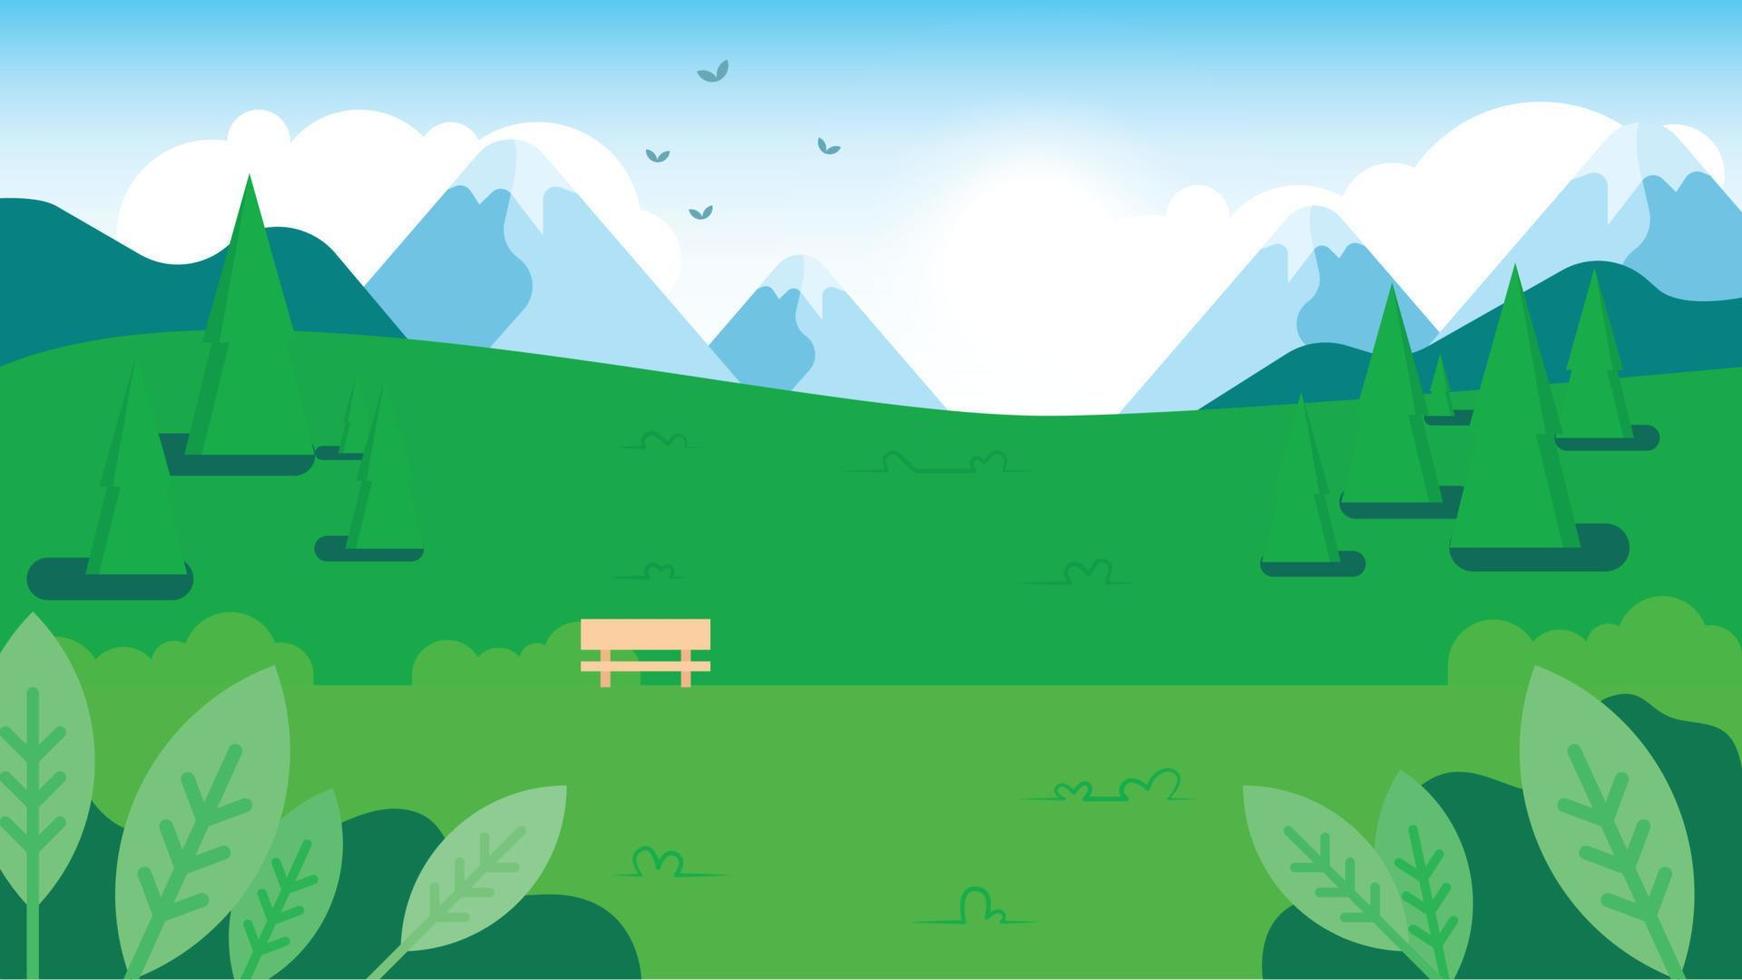 Grassland with mountains and sunny sky. Summer meadow landscape vector illustration.